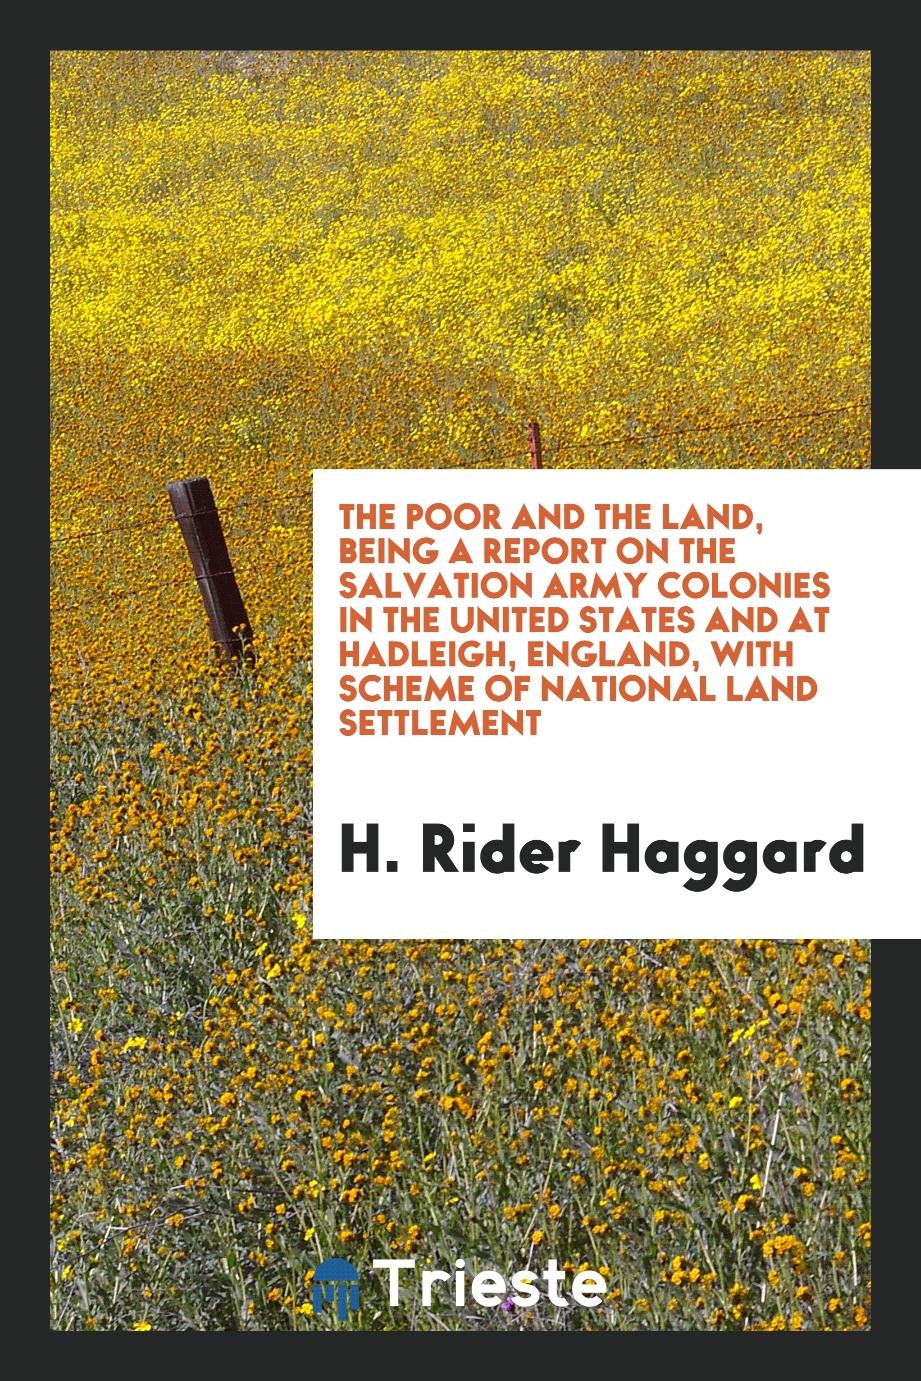 The poor and the land, being a Report on the Salvation Army colonies in the United States and at Hadleigh, England, with Scheme of national land settlement